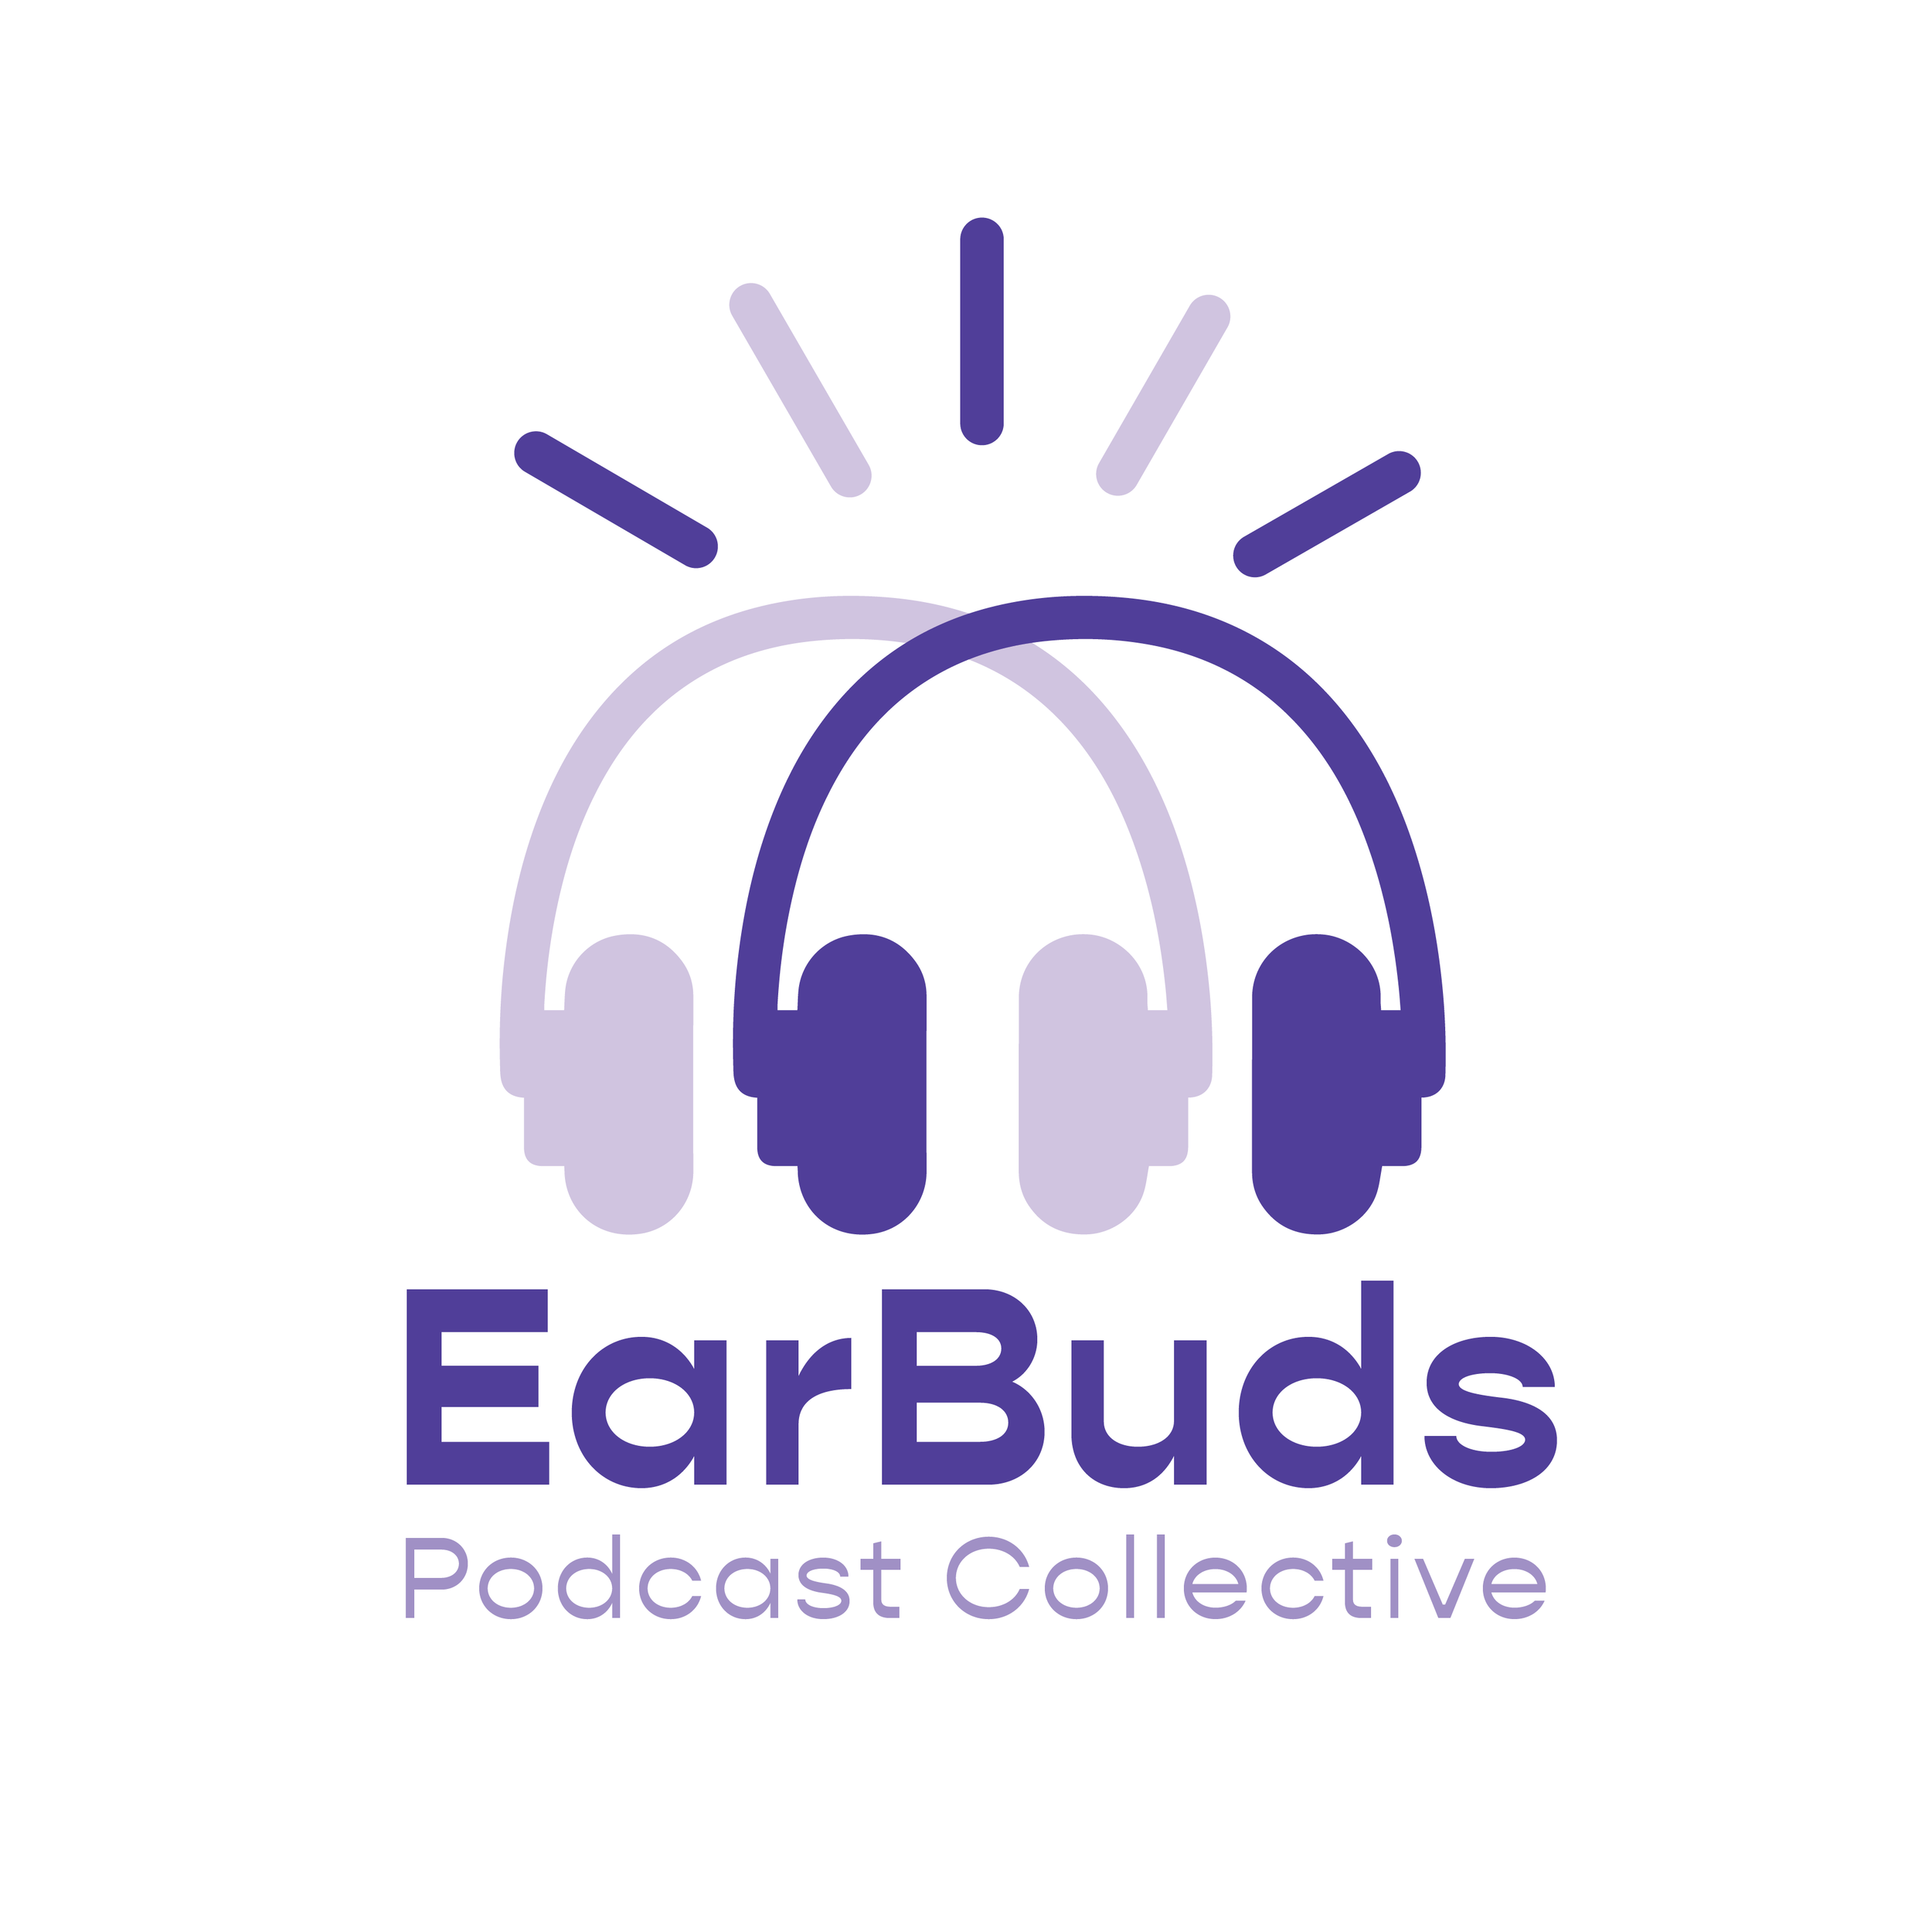 EarBuds Podcast Collective | A Client of Tinker Solution